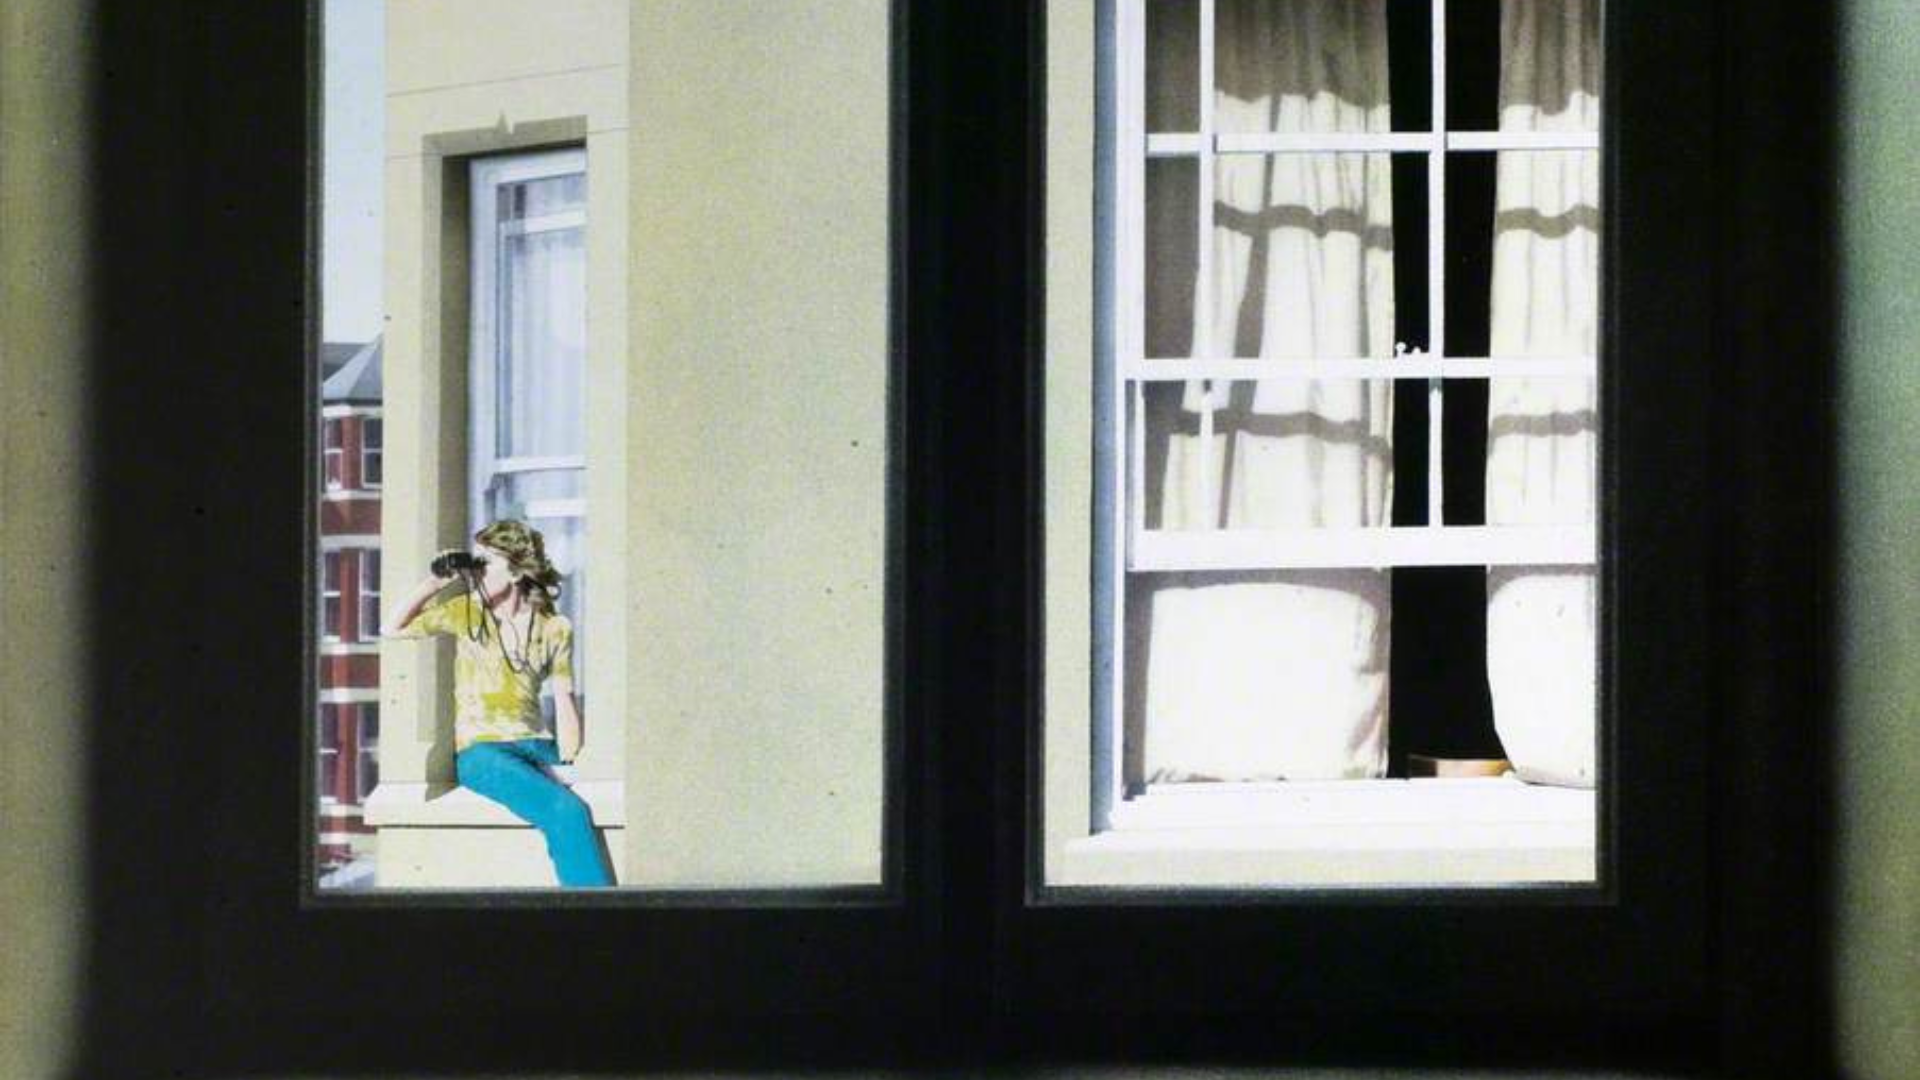 An artists impression of a woman sat on a window ledge of a tall building looking out to the horizon with binoculars